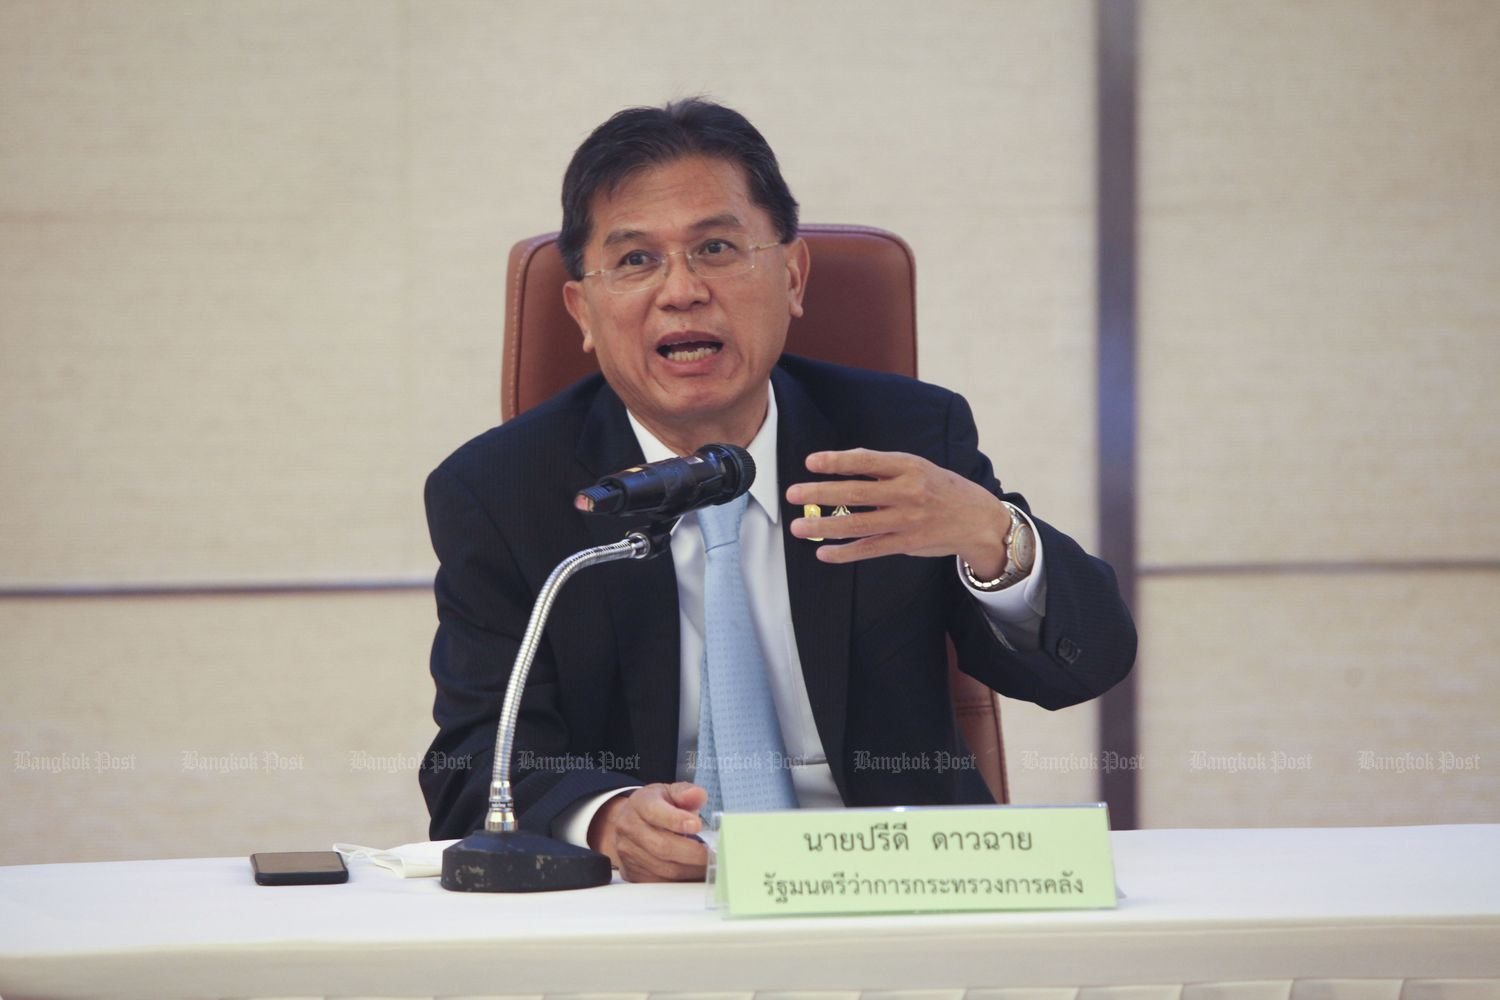 Thai Finance Minister Resigns After 20 Days In Office